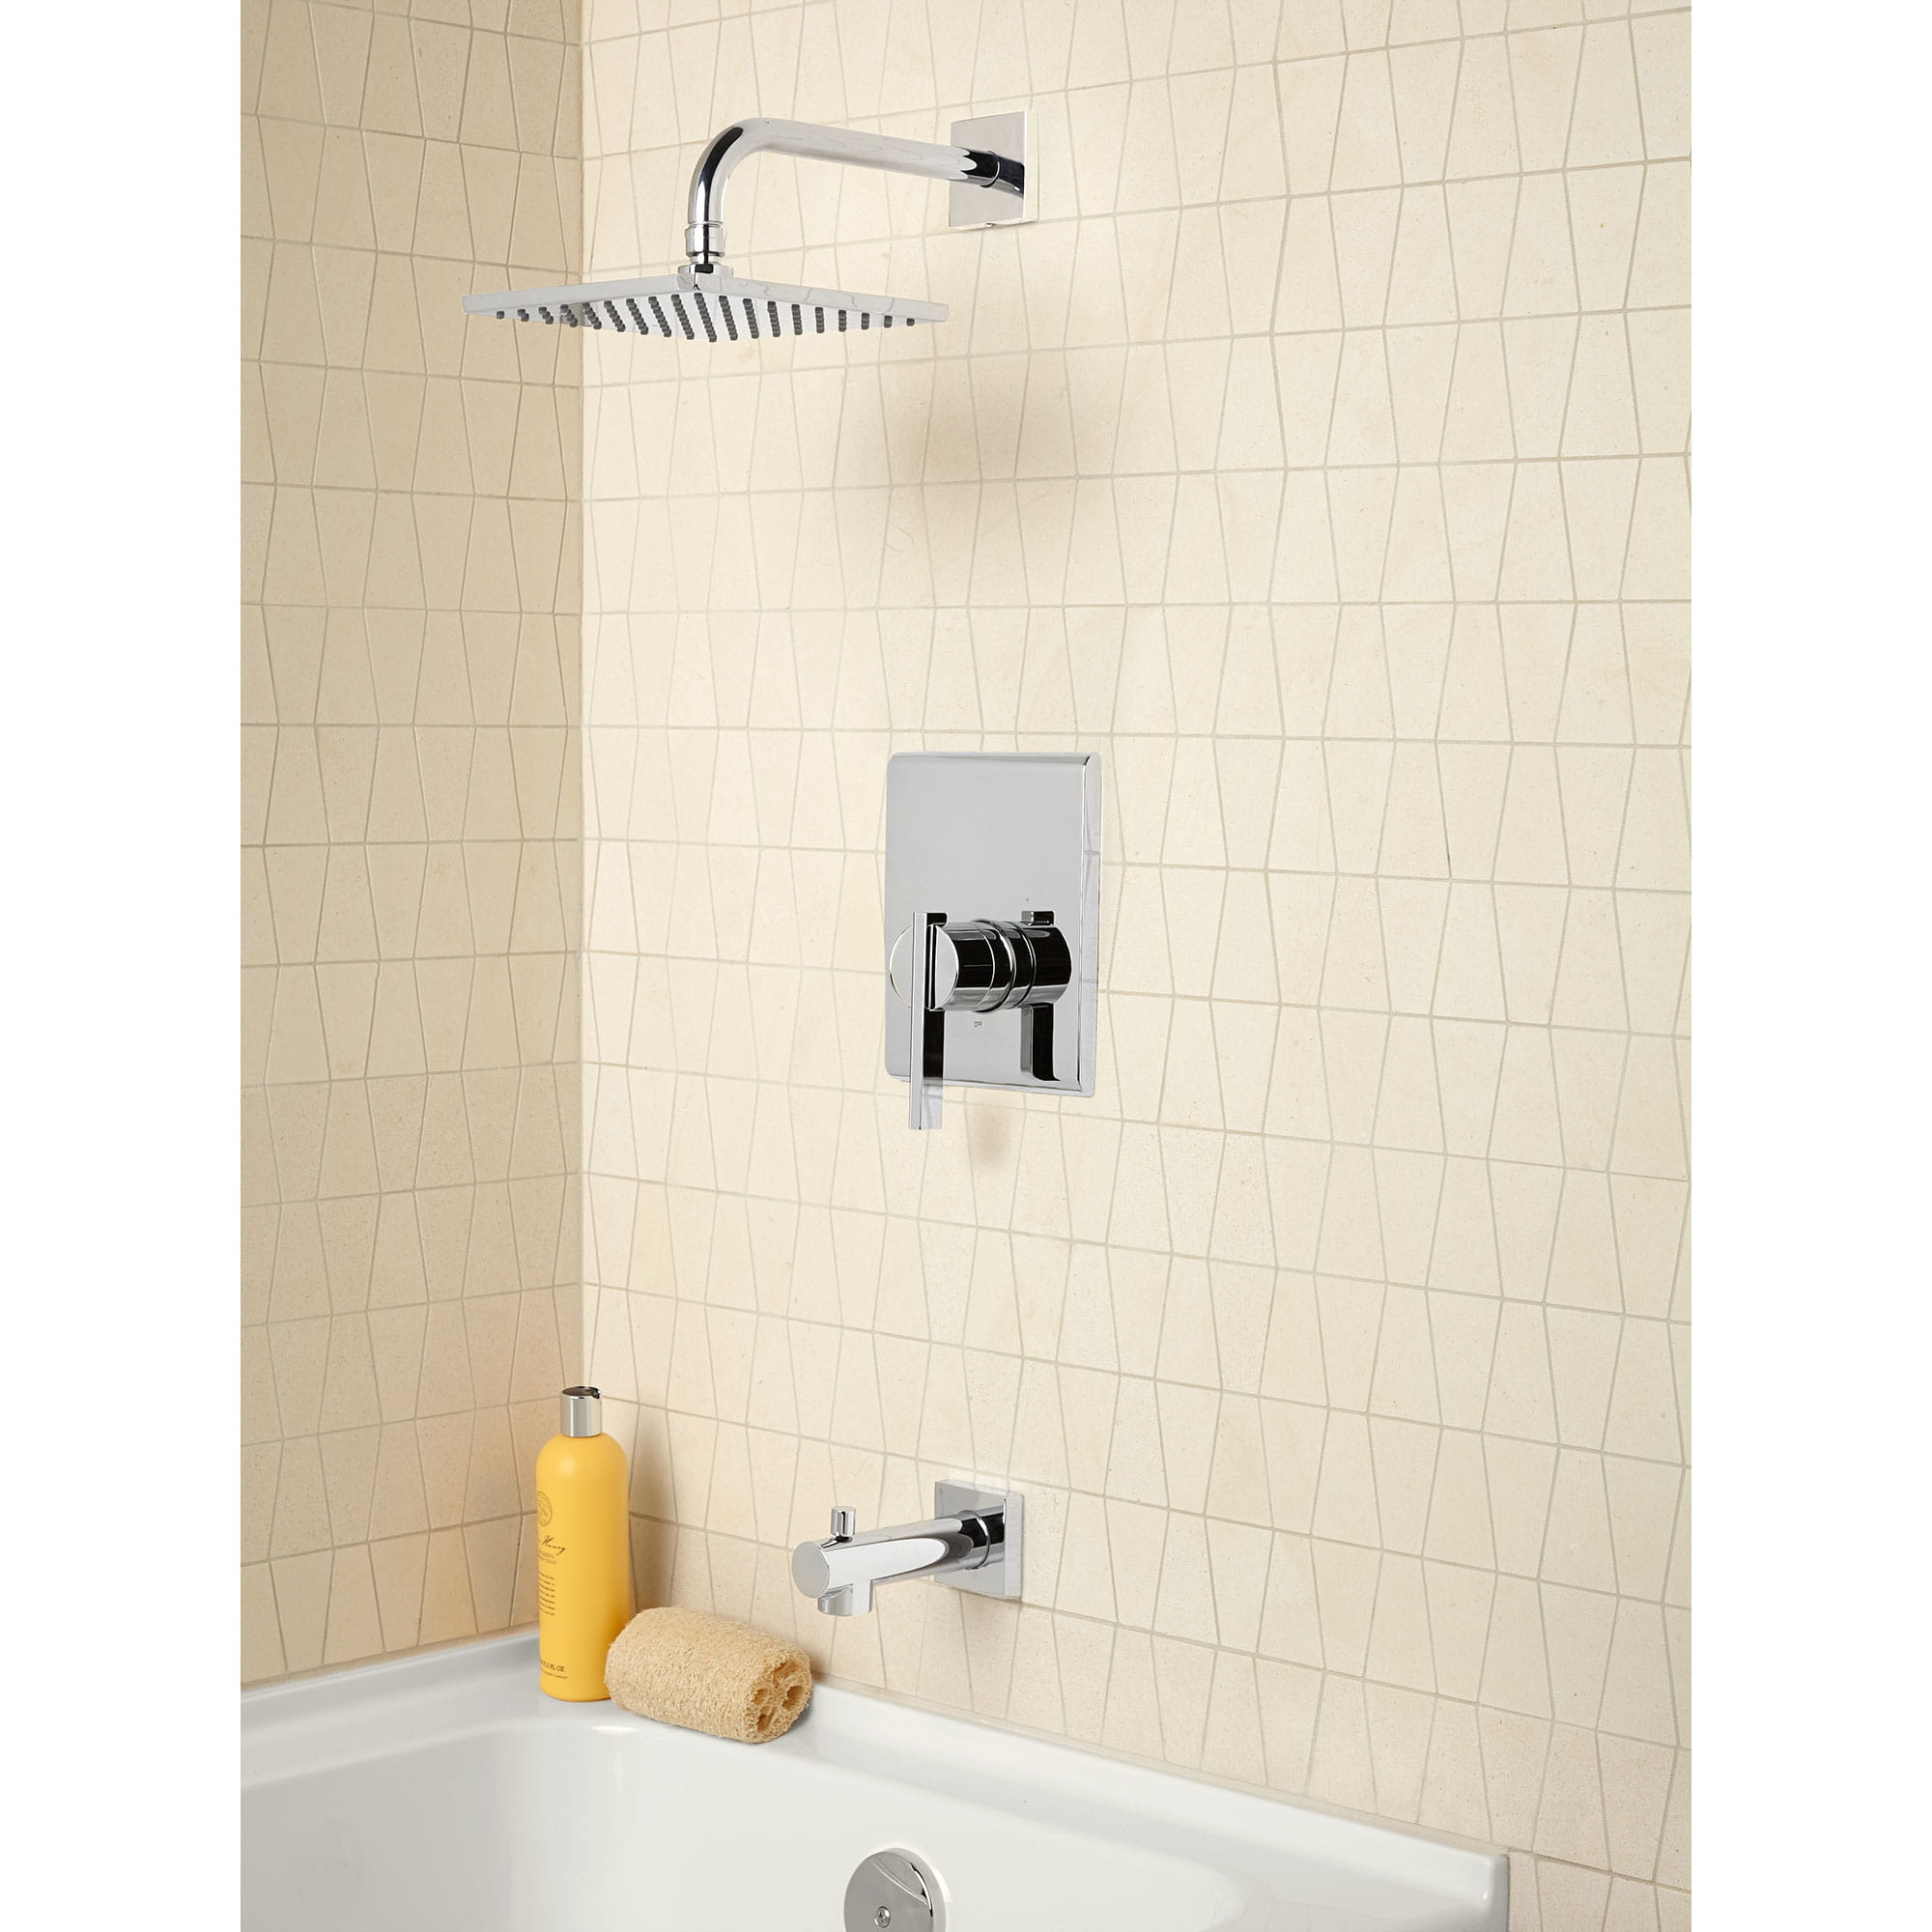 Times Square 25 gpm 95 L min Tub and Shower Trim Kit With Rain Showerhead Double Ceramic Pressure Balance Cartridge With Lever Handle CHROME